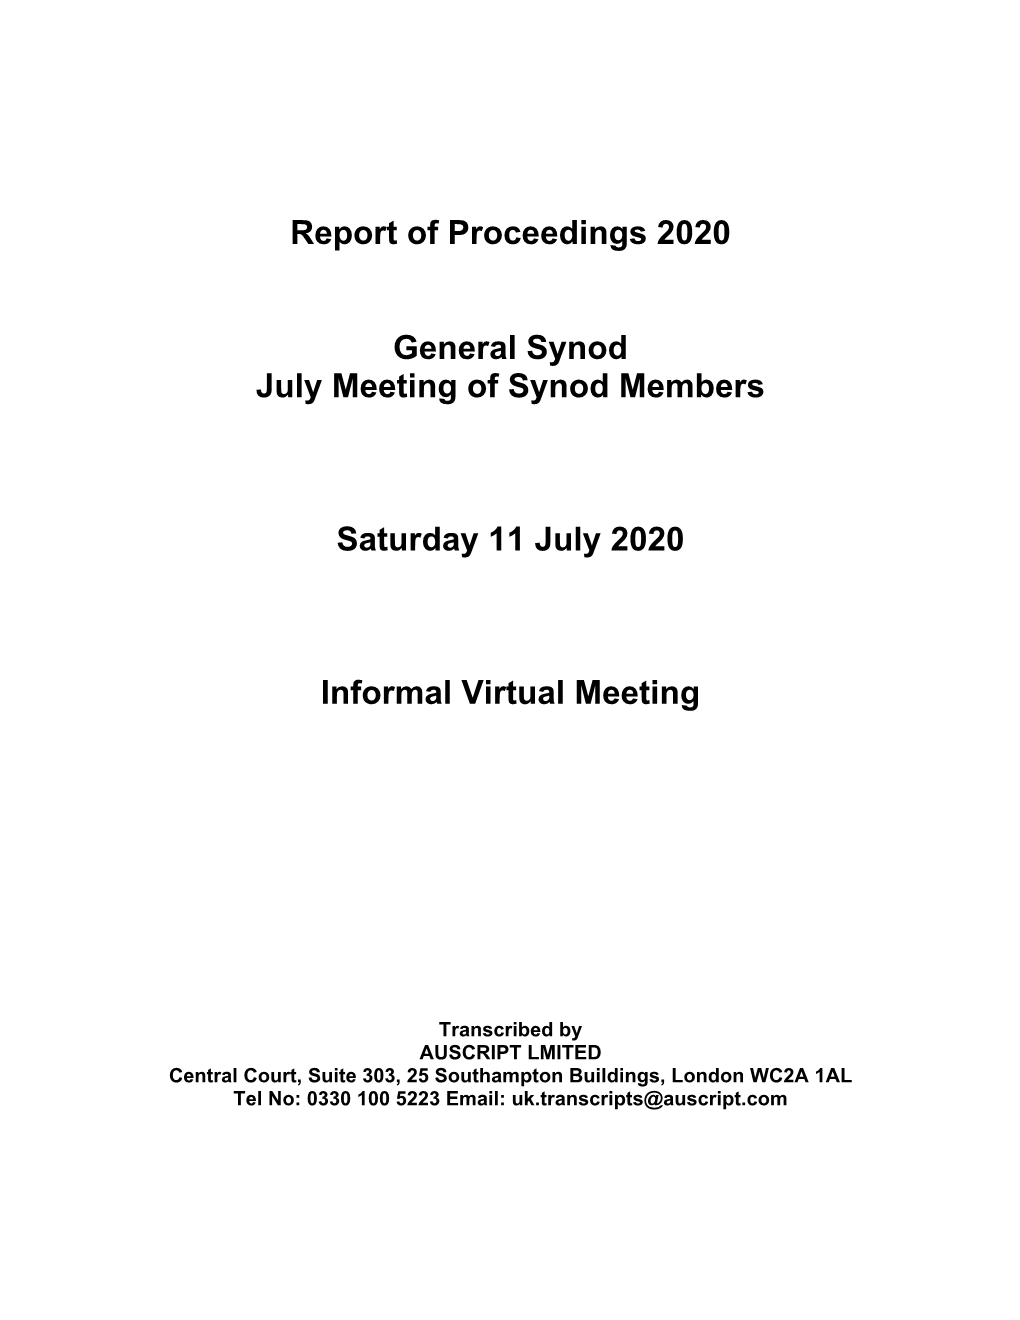 Report of Proceedings 2020 General Synod July Meeting of Synod